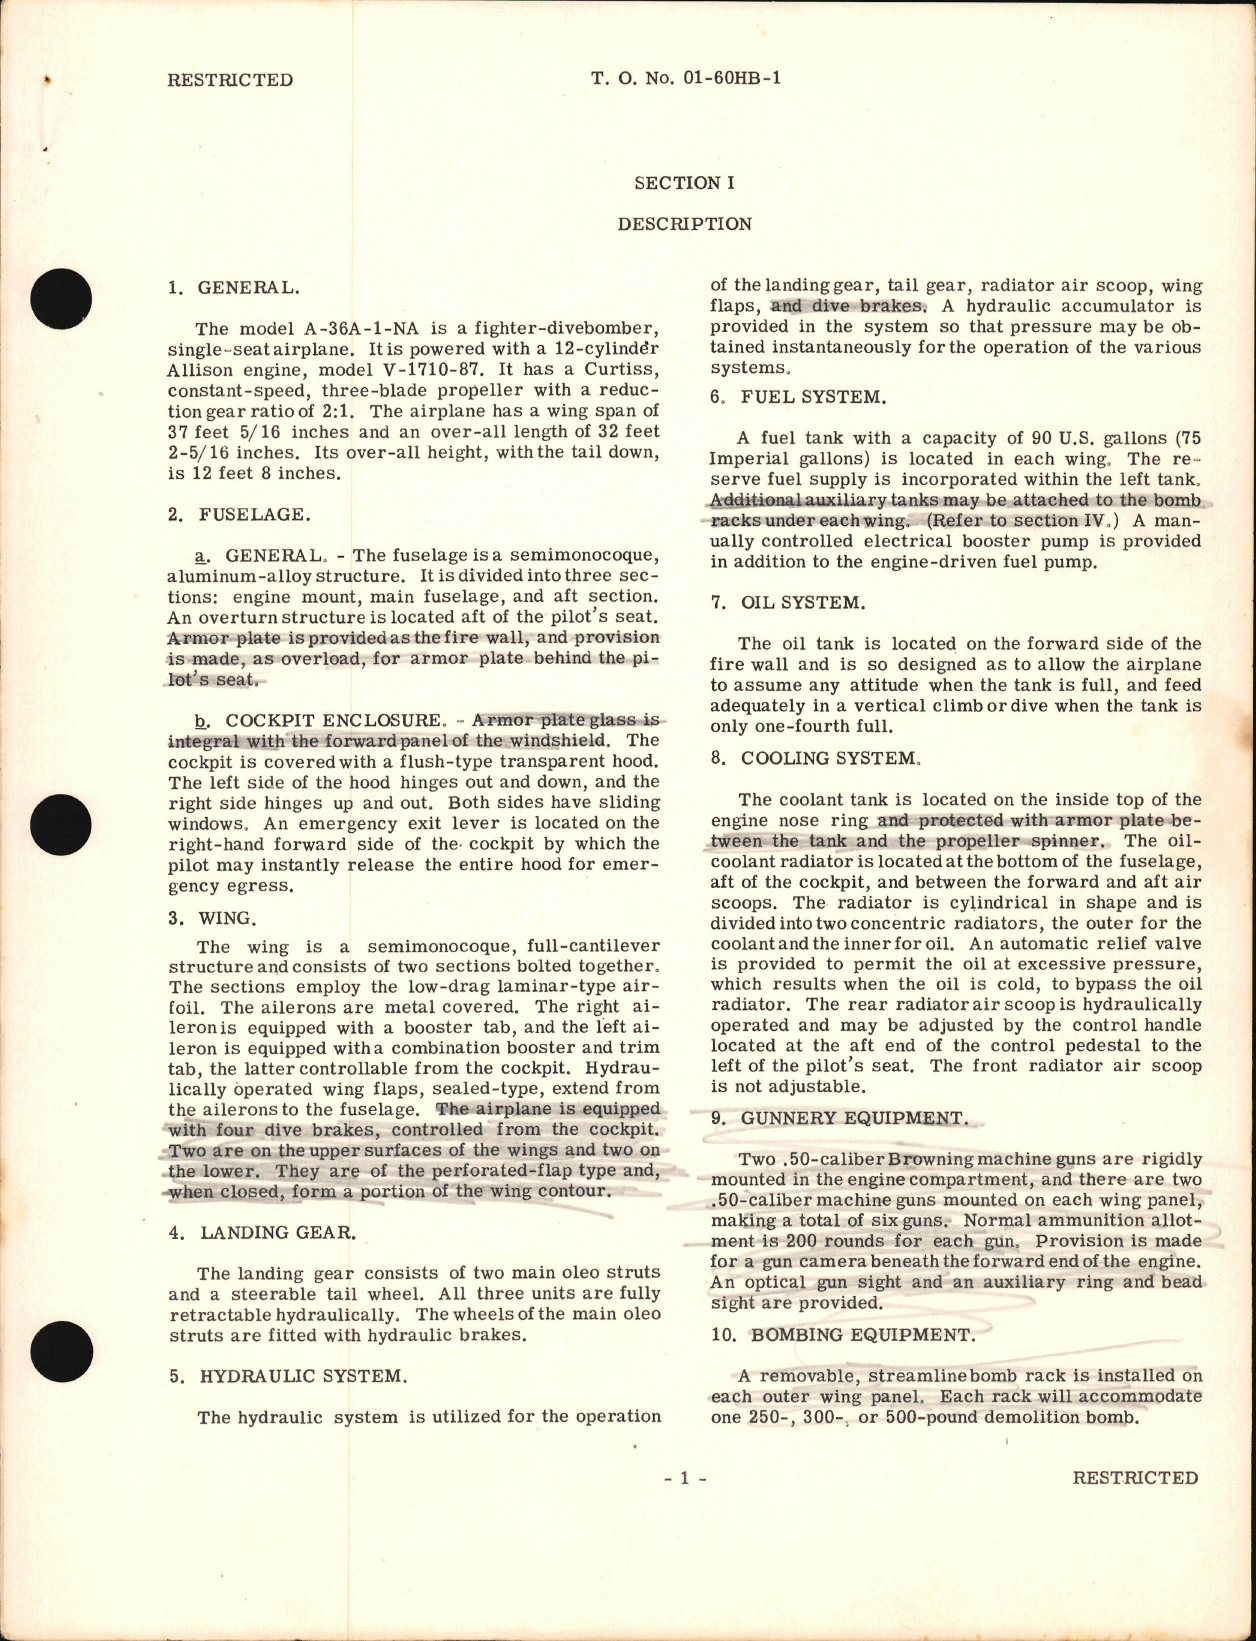 Sample page 7 from AirCorps Library document: Pilot's Flight Operating Instructions for A-36A-1-NA